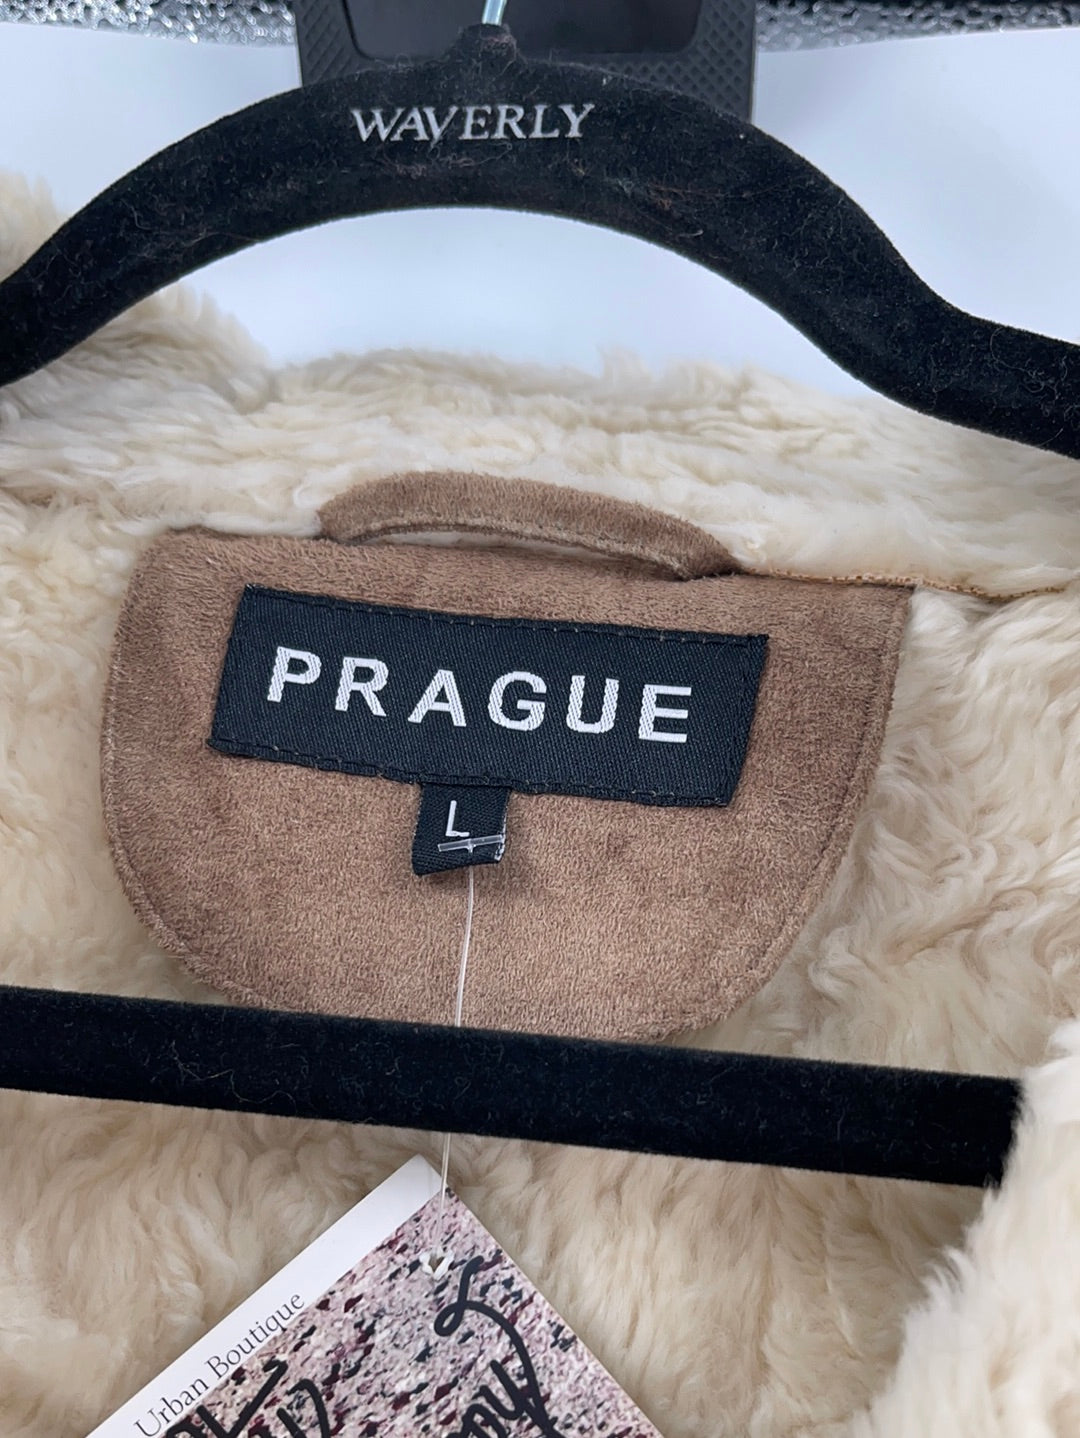 Prague Faux Brown Suede  Shearling Lining Lace Up Detail on Sleeves and Front of Coat (Size Large)